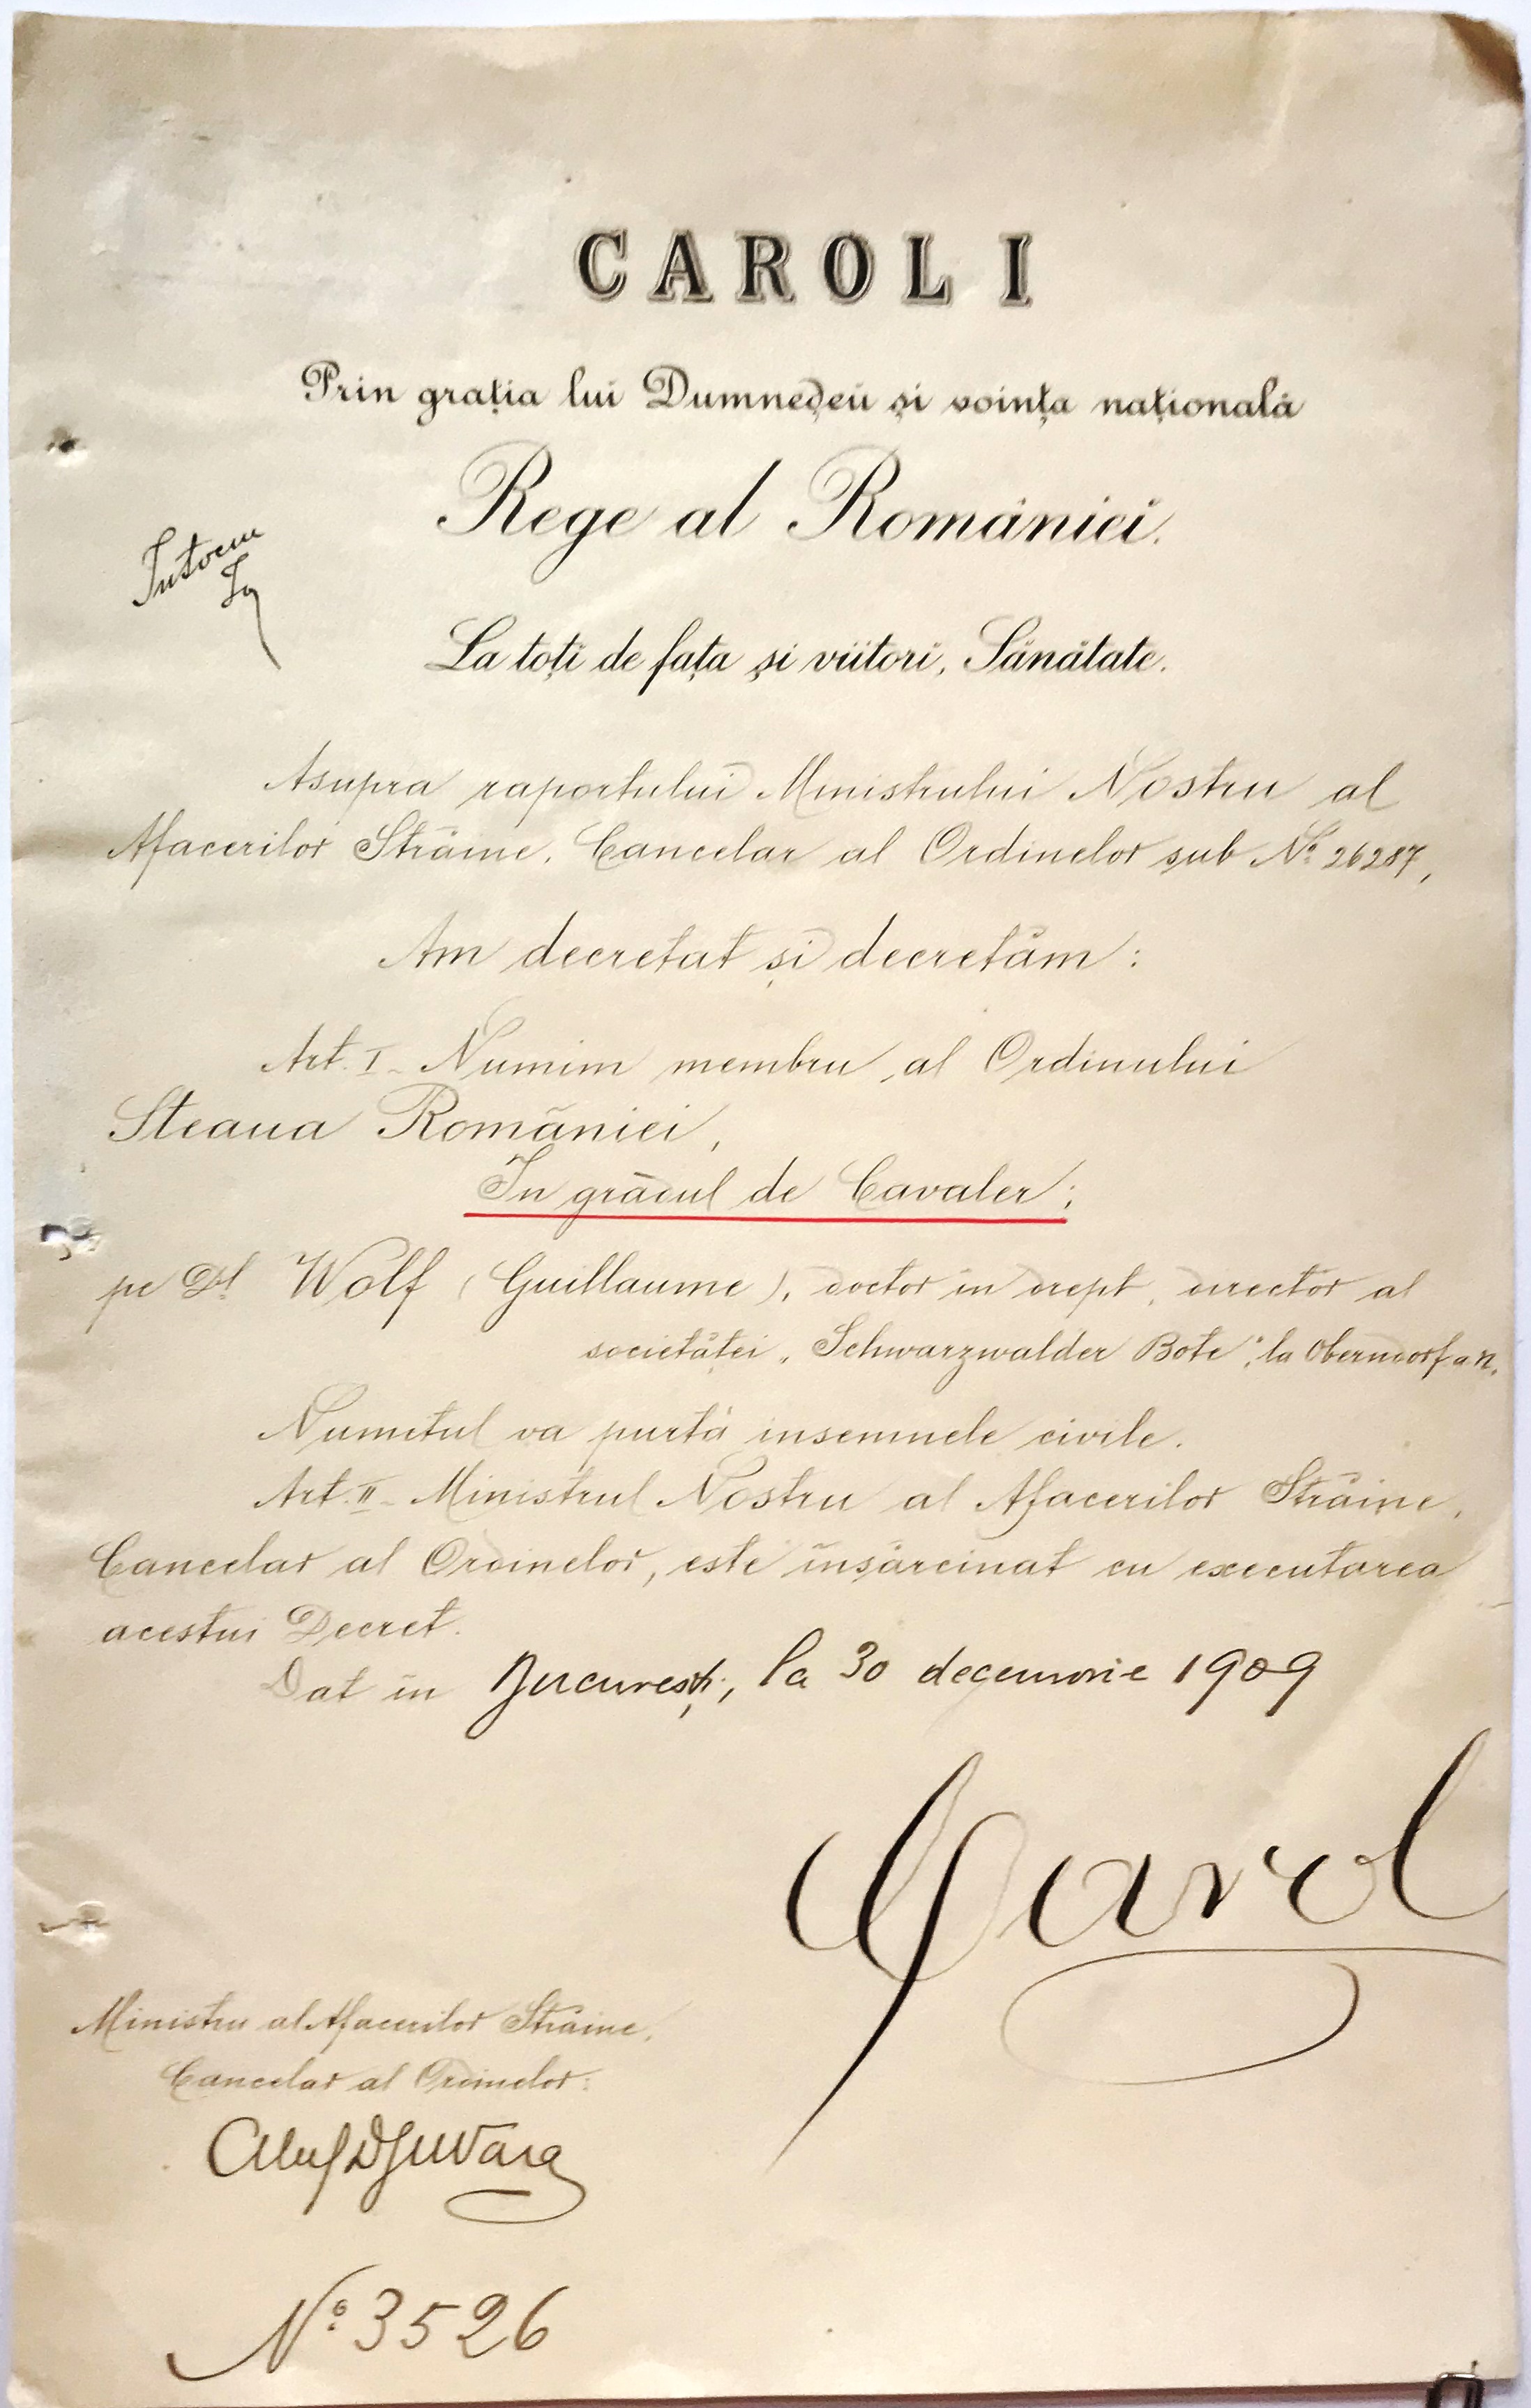 ORDER OF THE STAR OF ROMANIA, to a German Lawyer